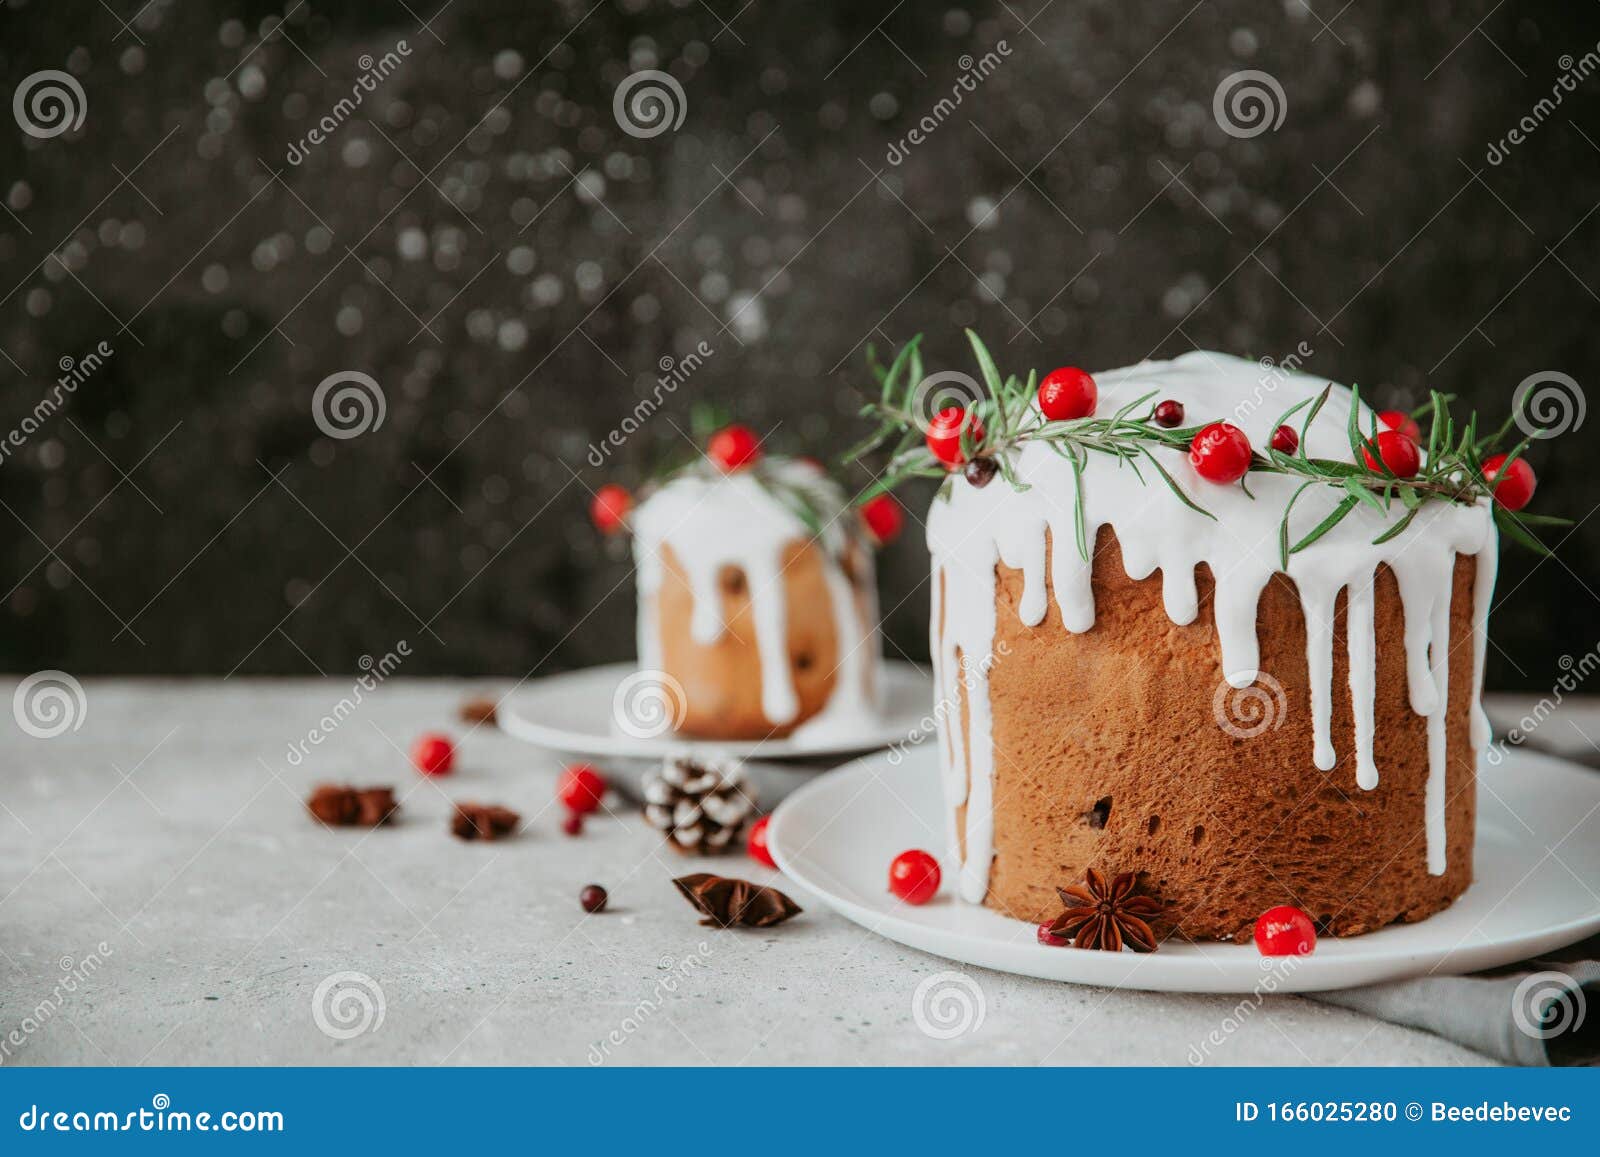 traditional fruitcake for christmas decorated with powdered sugar